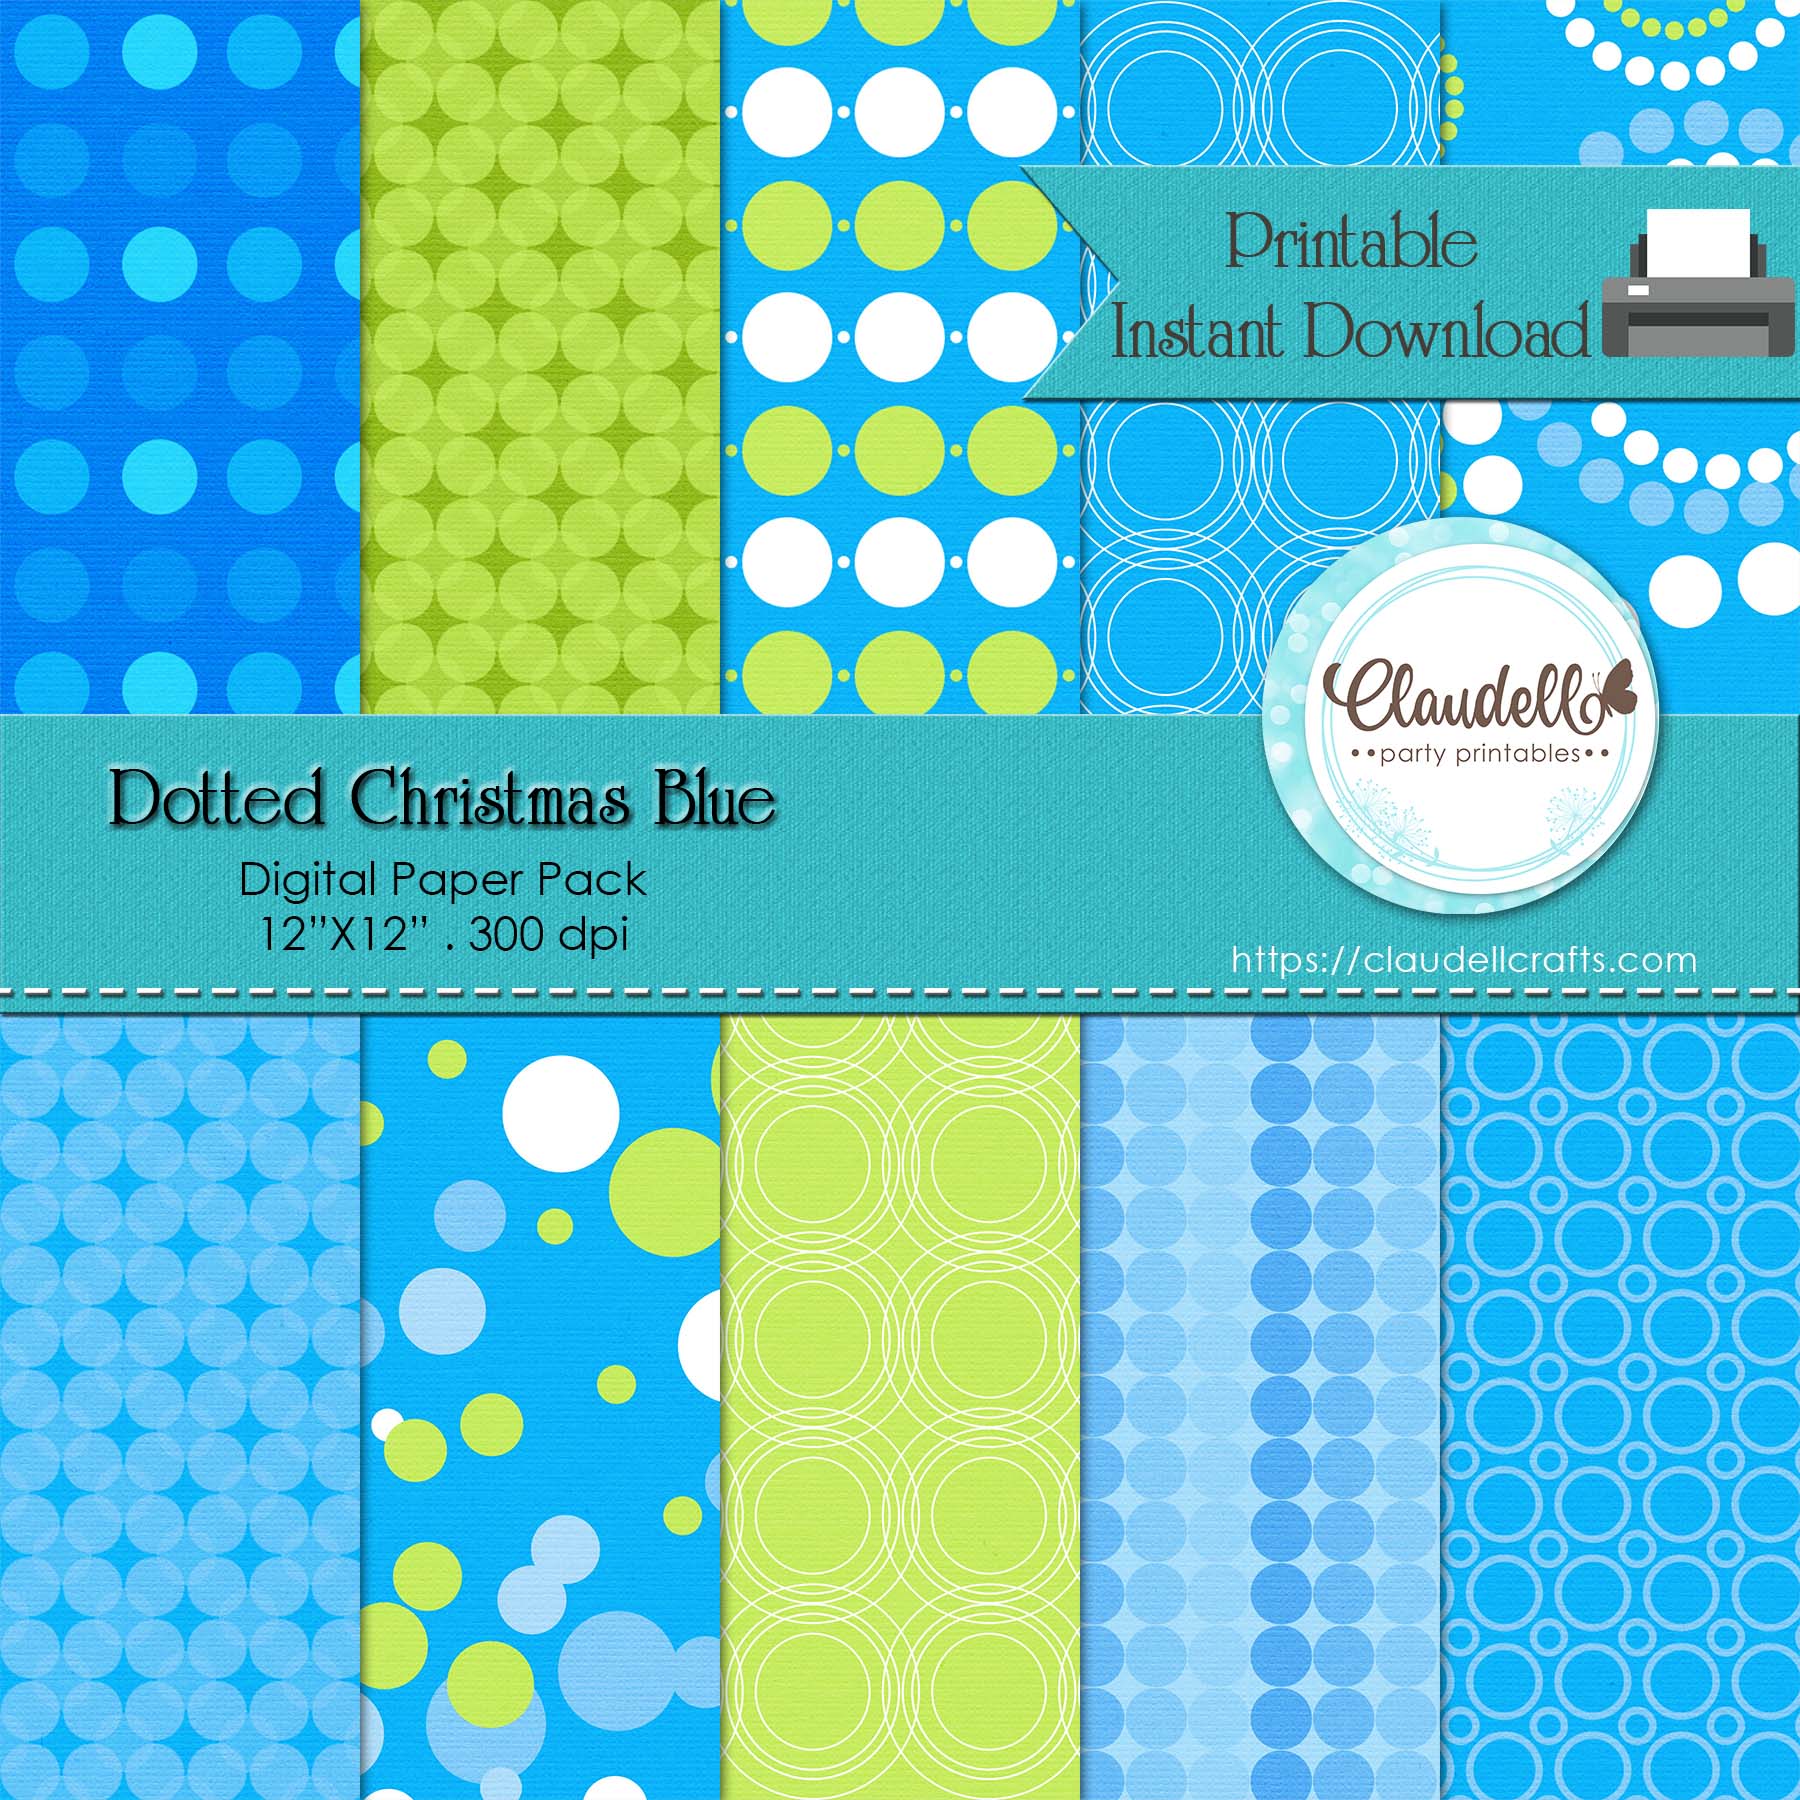 Dotted Christmas Blue Digital Paper Pack (10) - 12